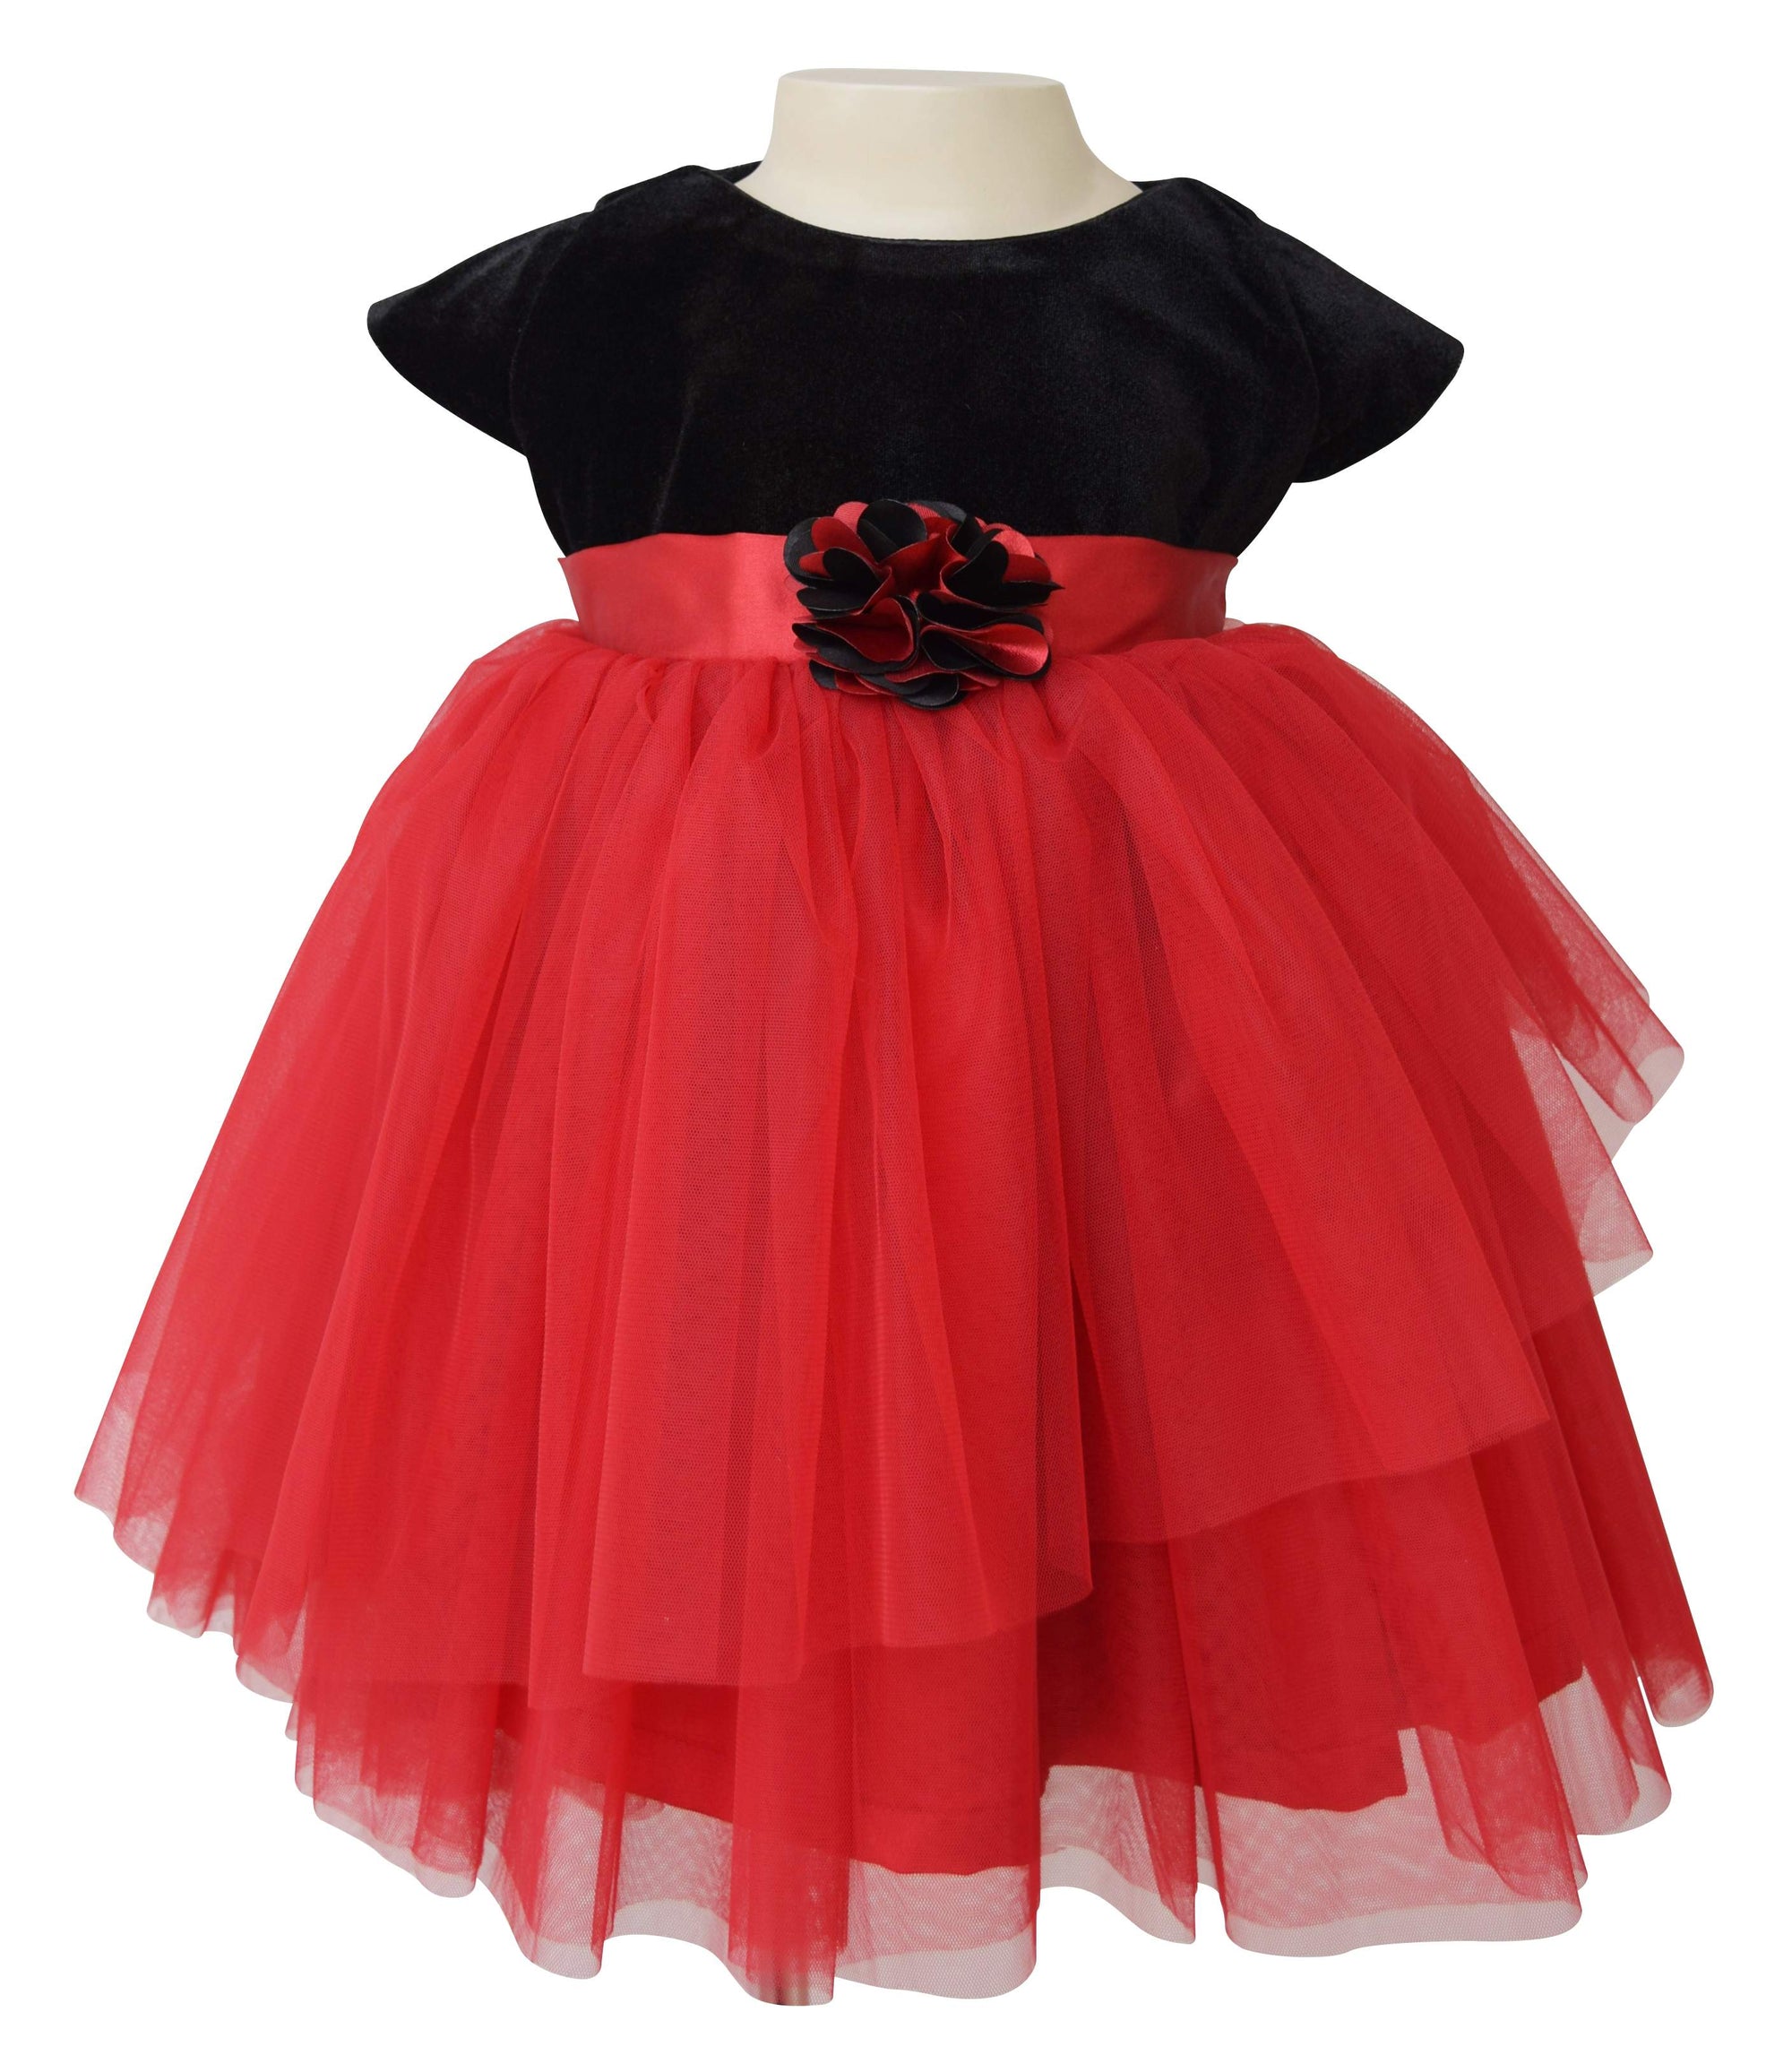 Lullaby Set Baby / Toddler Girls Birthday Party Dress with Collar - Pink